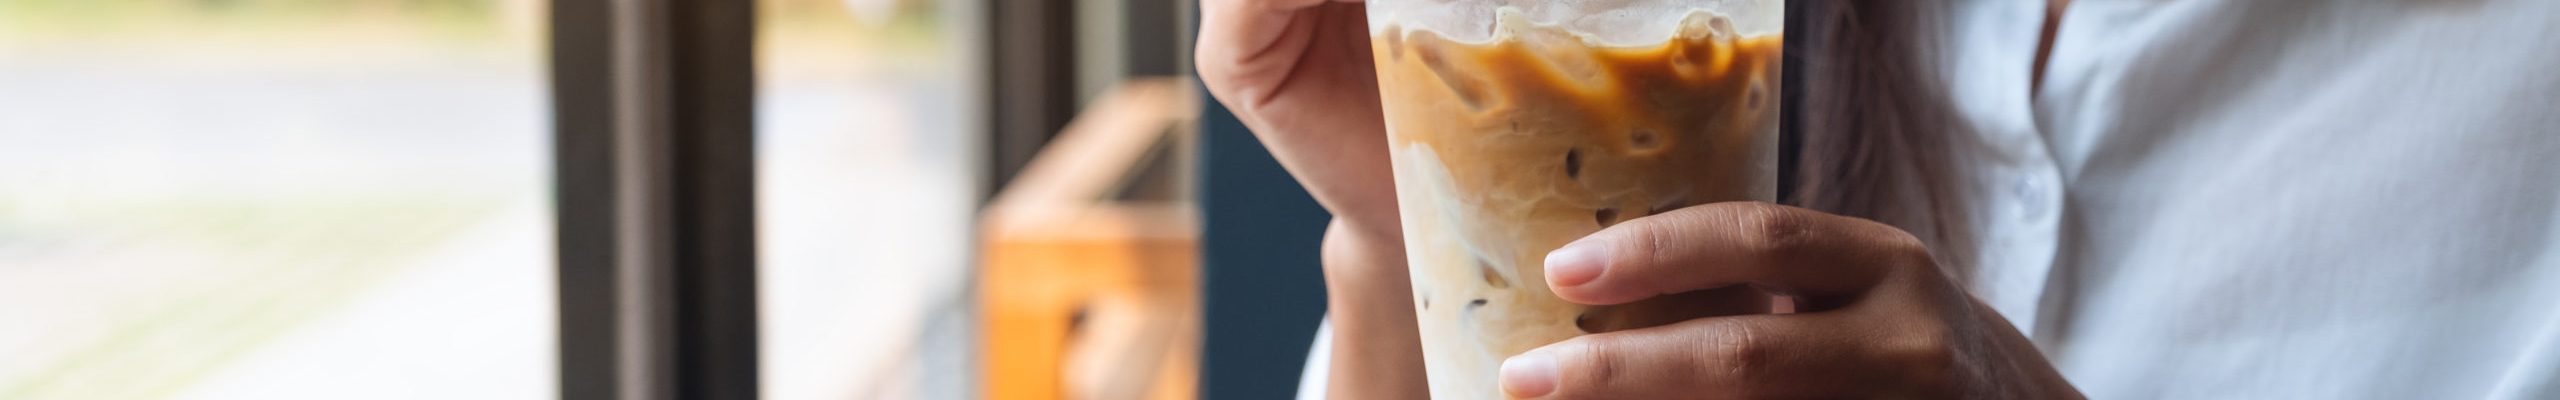 Most of us love a good cup of coffee. But coffee and other food and drinks can lead to staining on your teeth. Let’s take a deeper look into how to prevent and how to remove coffee stains from teeth.